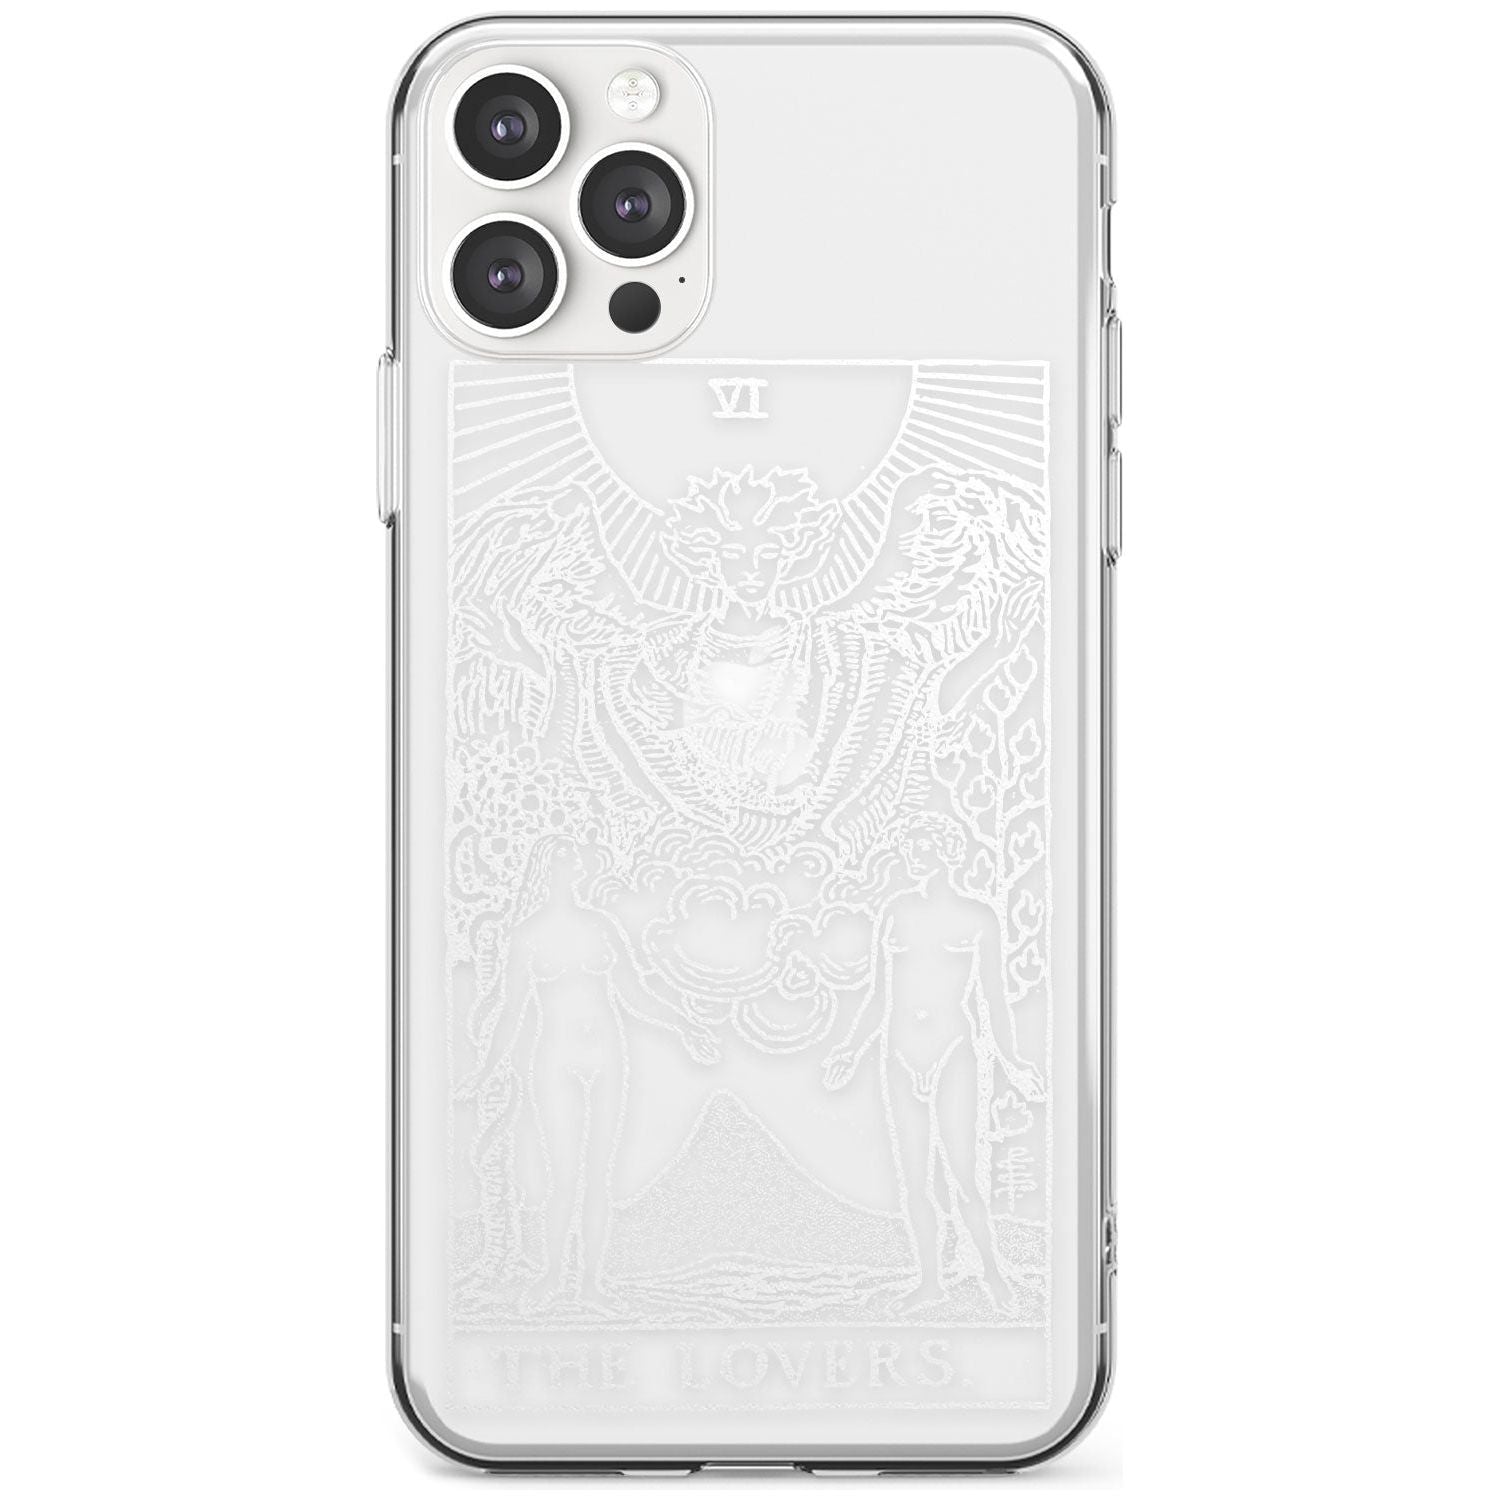 The Lovers Tarot Card - White Transparent Black Impact Phone Case for iPhone 11 Pro Max